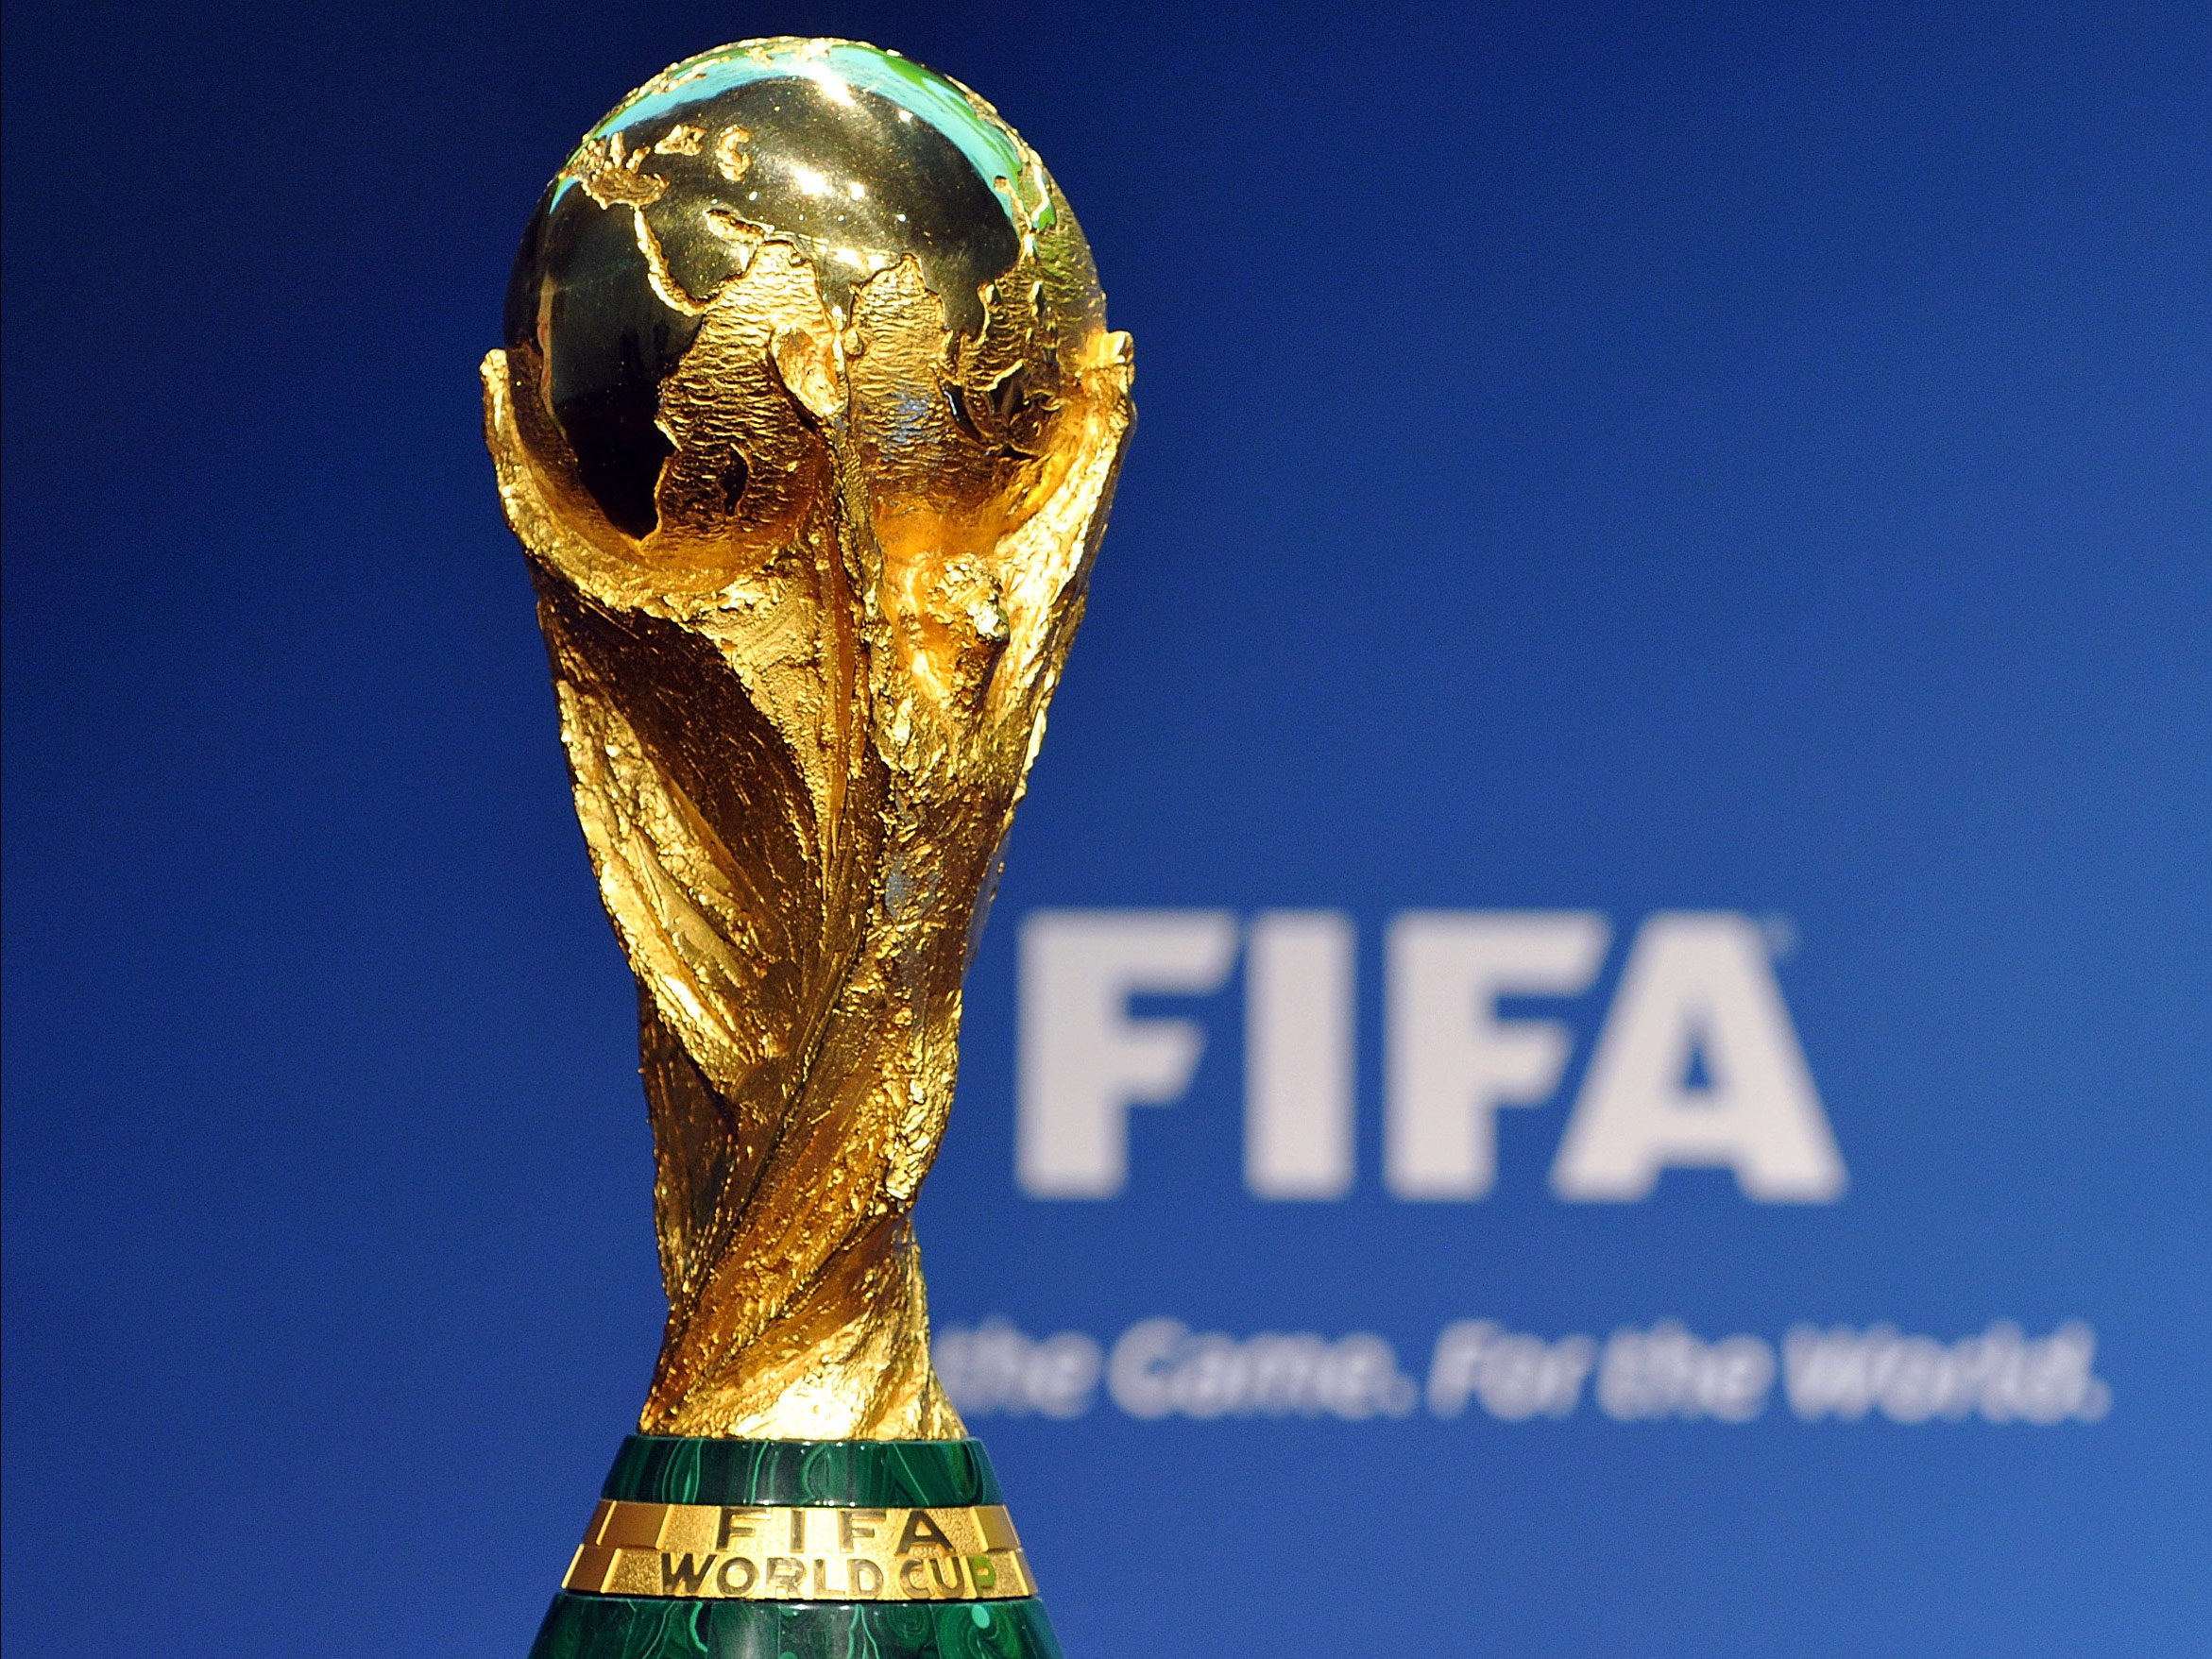 USA, Canada and Mexico selected to host 2026 FIFA World Cup - SoccerWire